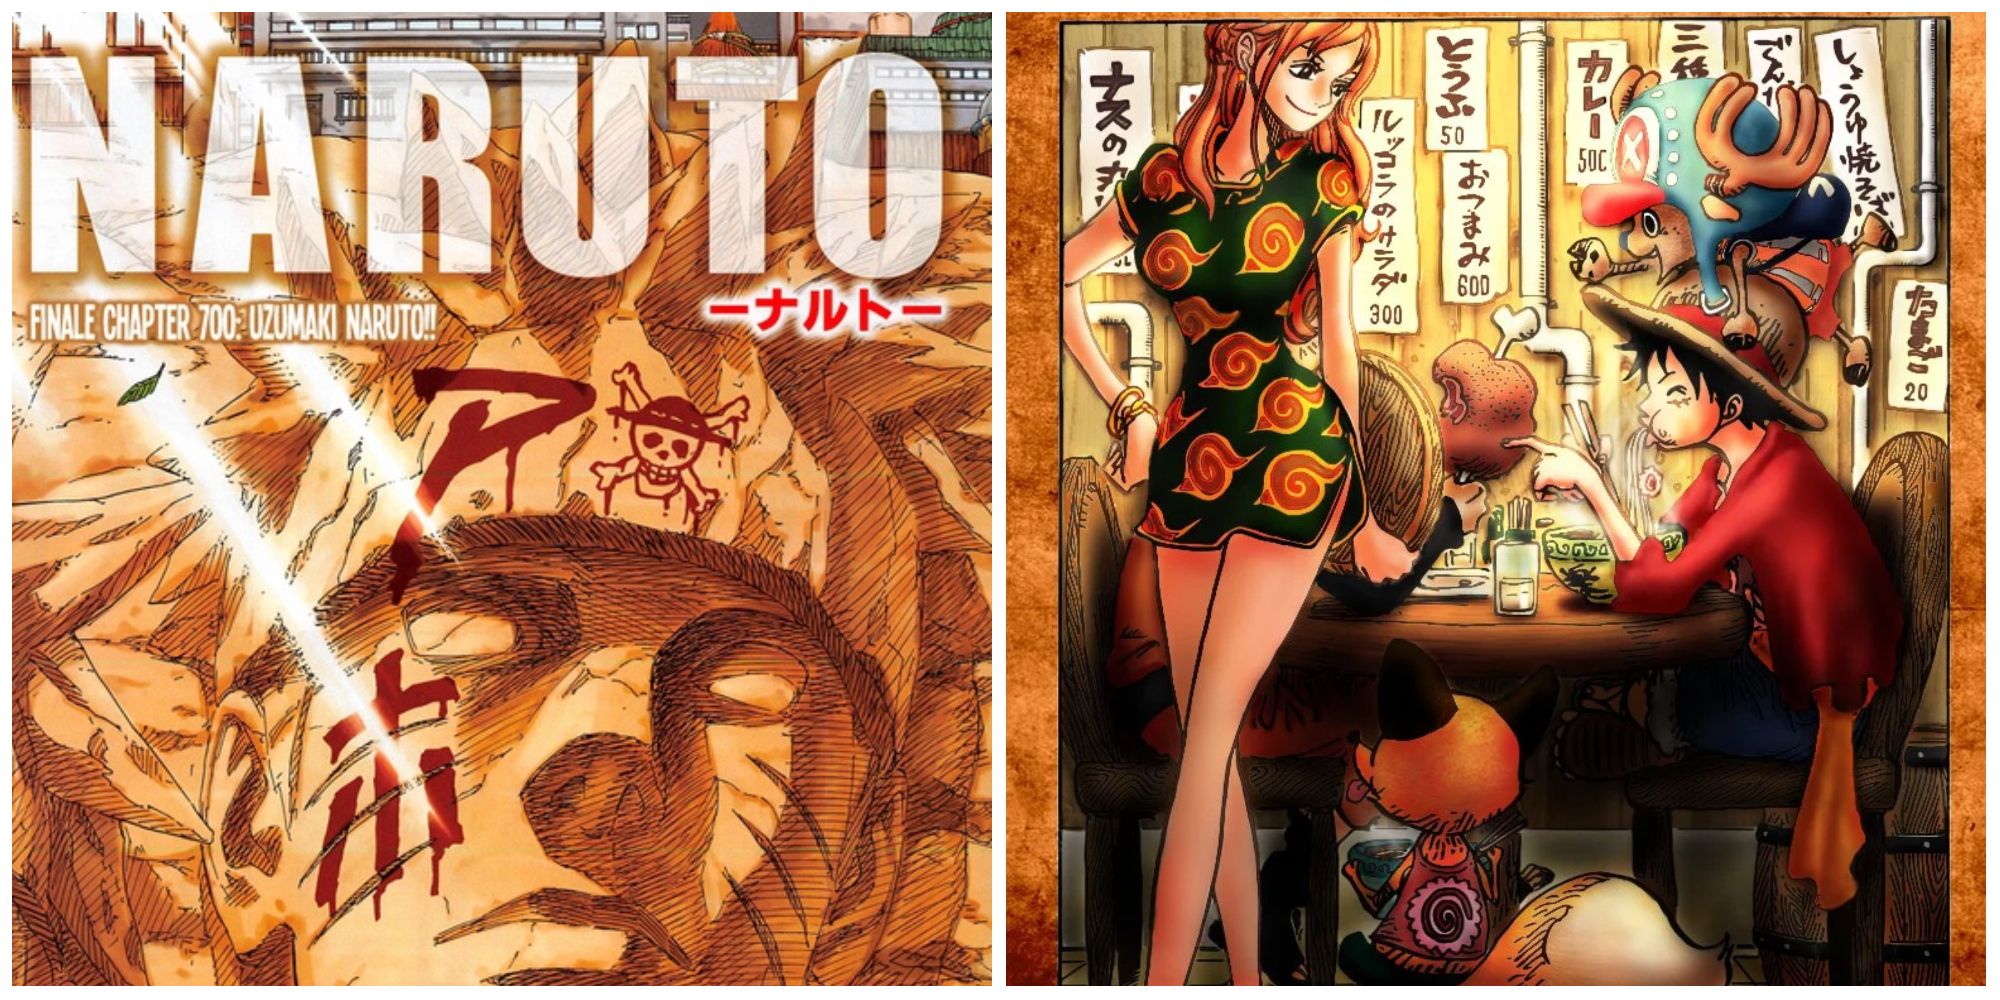 Naruto Chapter 700 One Piece tribute, One Piece chapter 766 Naruto tribute